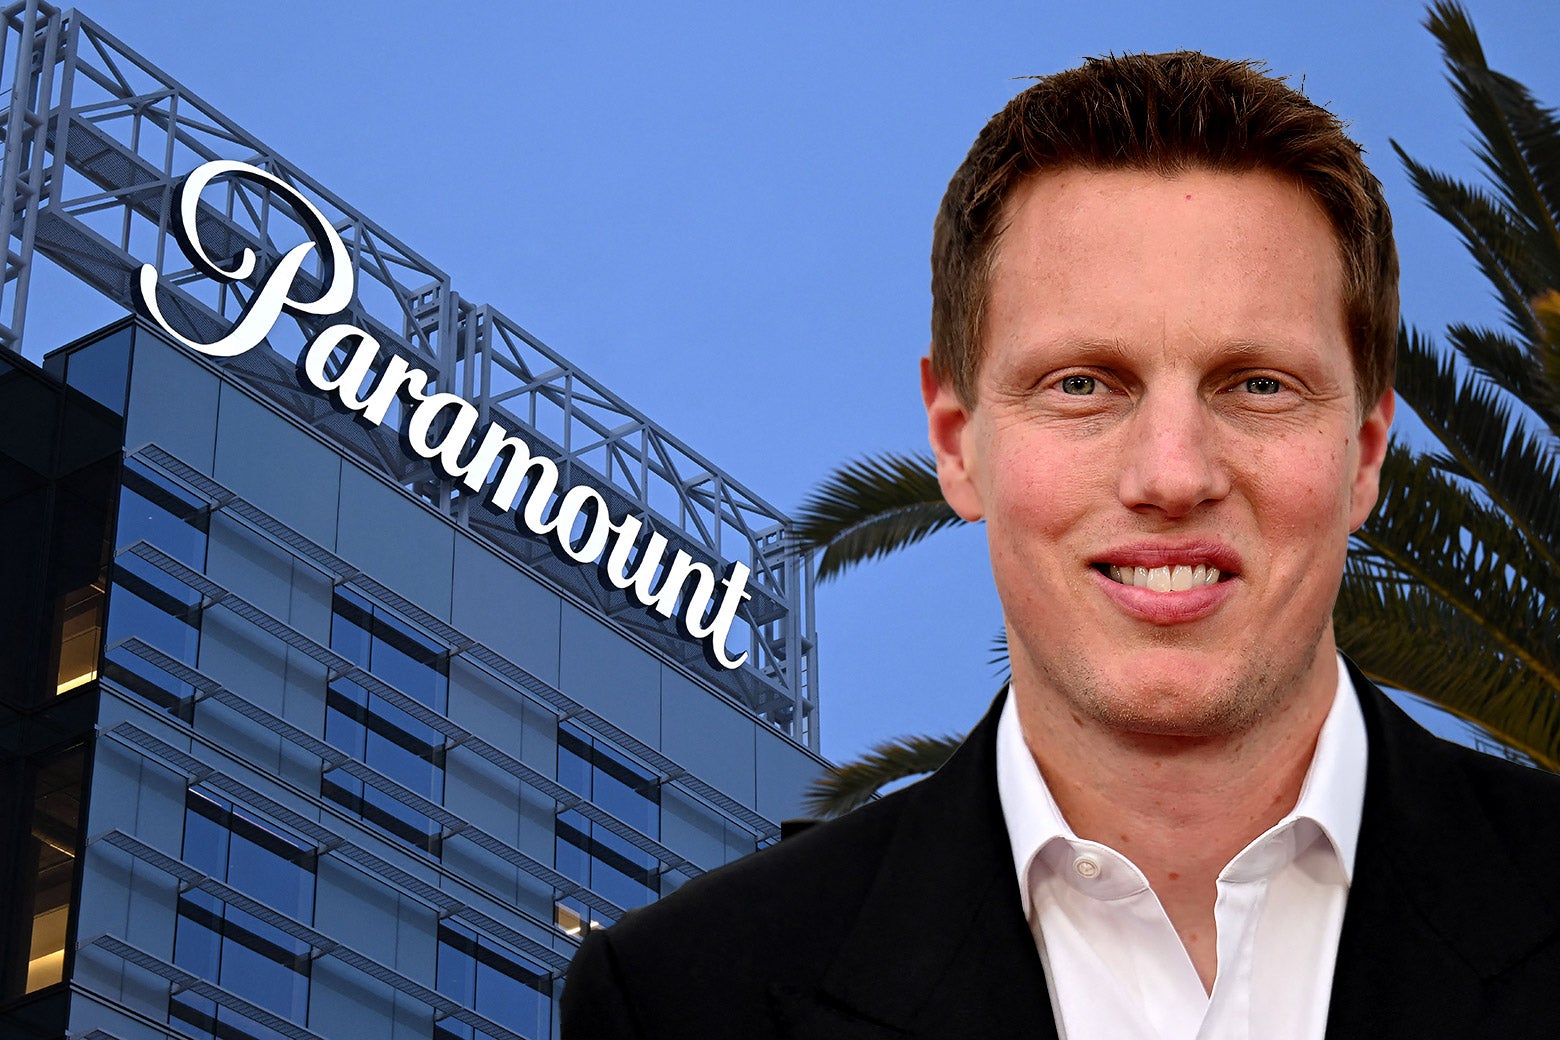 A New Billionaire Is Set to Take Control of Paramount. It’s … Kind of a Good Thing.